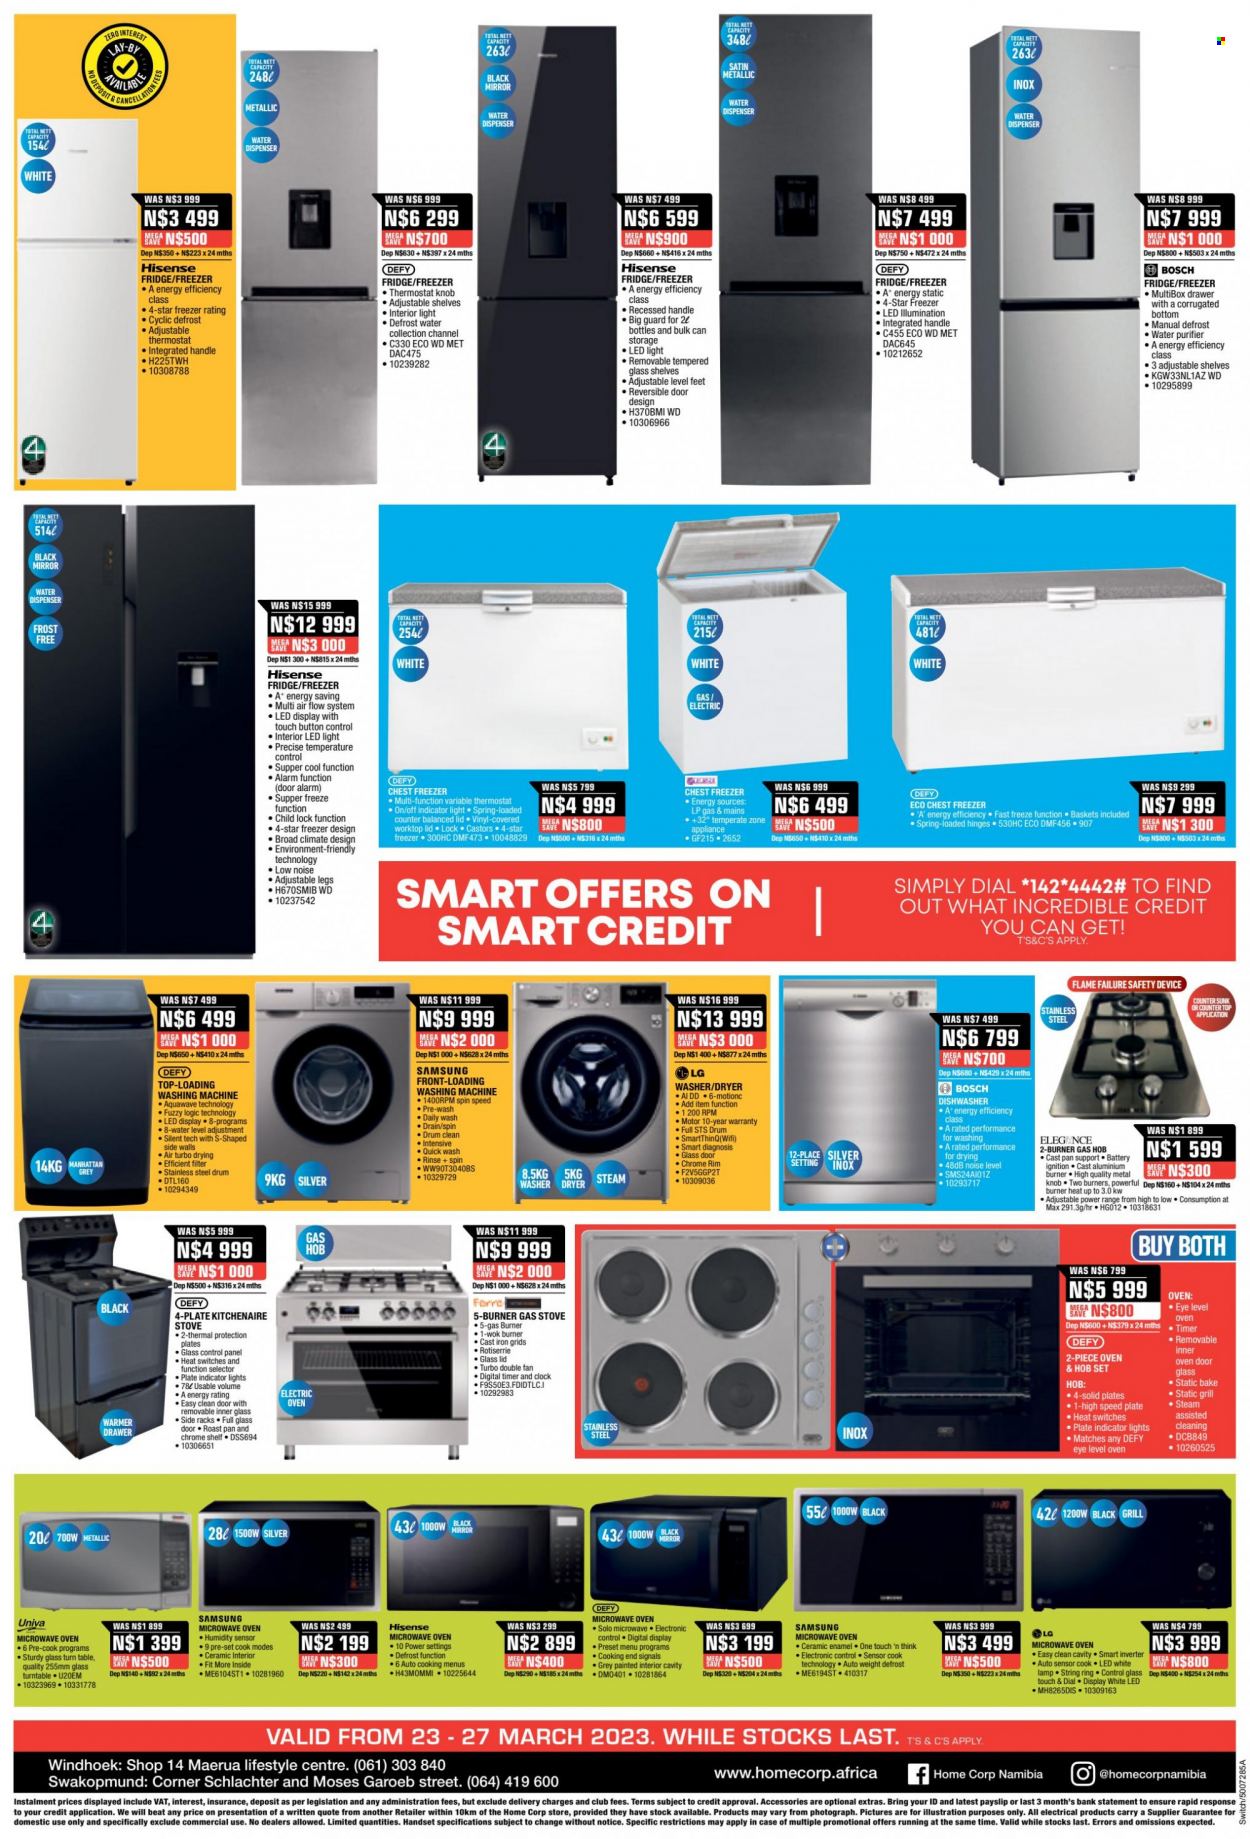 thumbnail - HomeCorp catalogue  - 23/03/2023 - 27/03/2023 - Sales products - table, shelves, mirror, LG, Samsung, Hisense, Bosch, freezer, chest freezer, refrigerator, fridge, oven, stove, gas stove, microwave, hob, water dispenser, basket. Page 8.